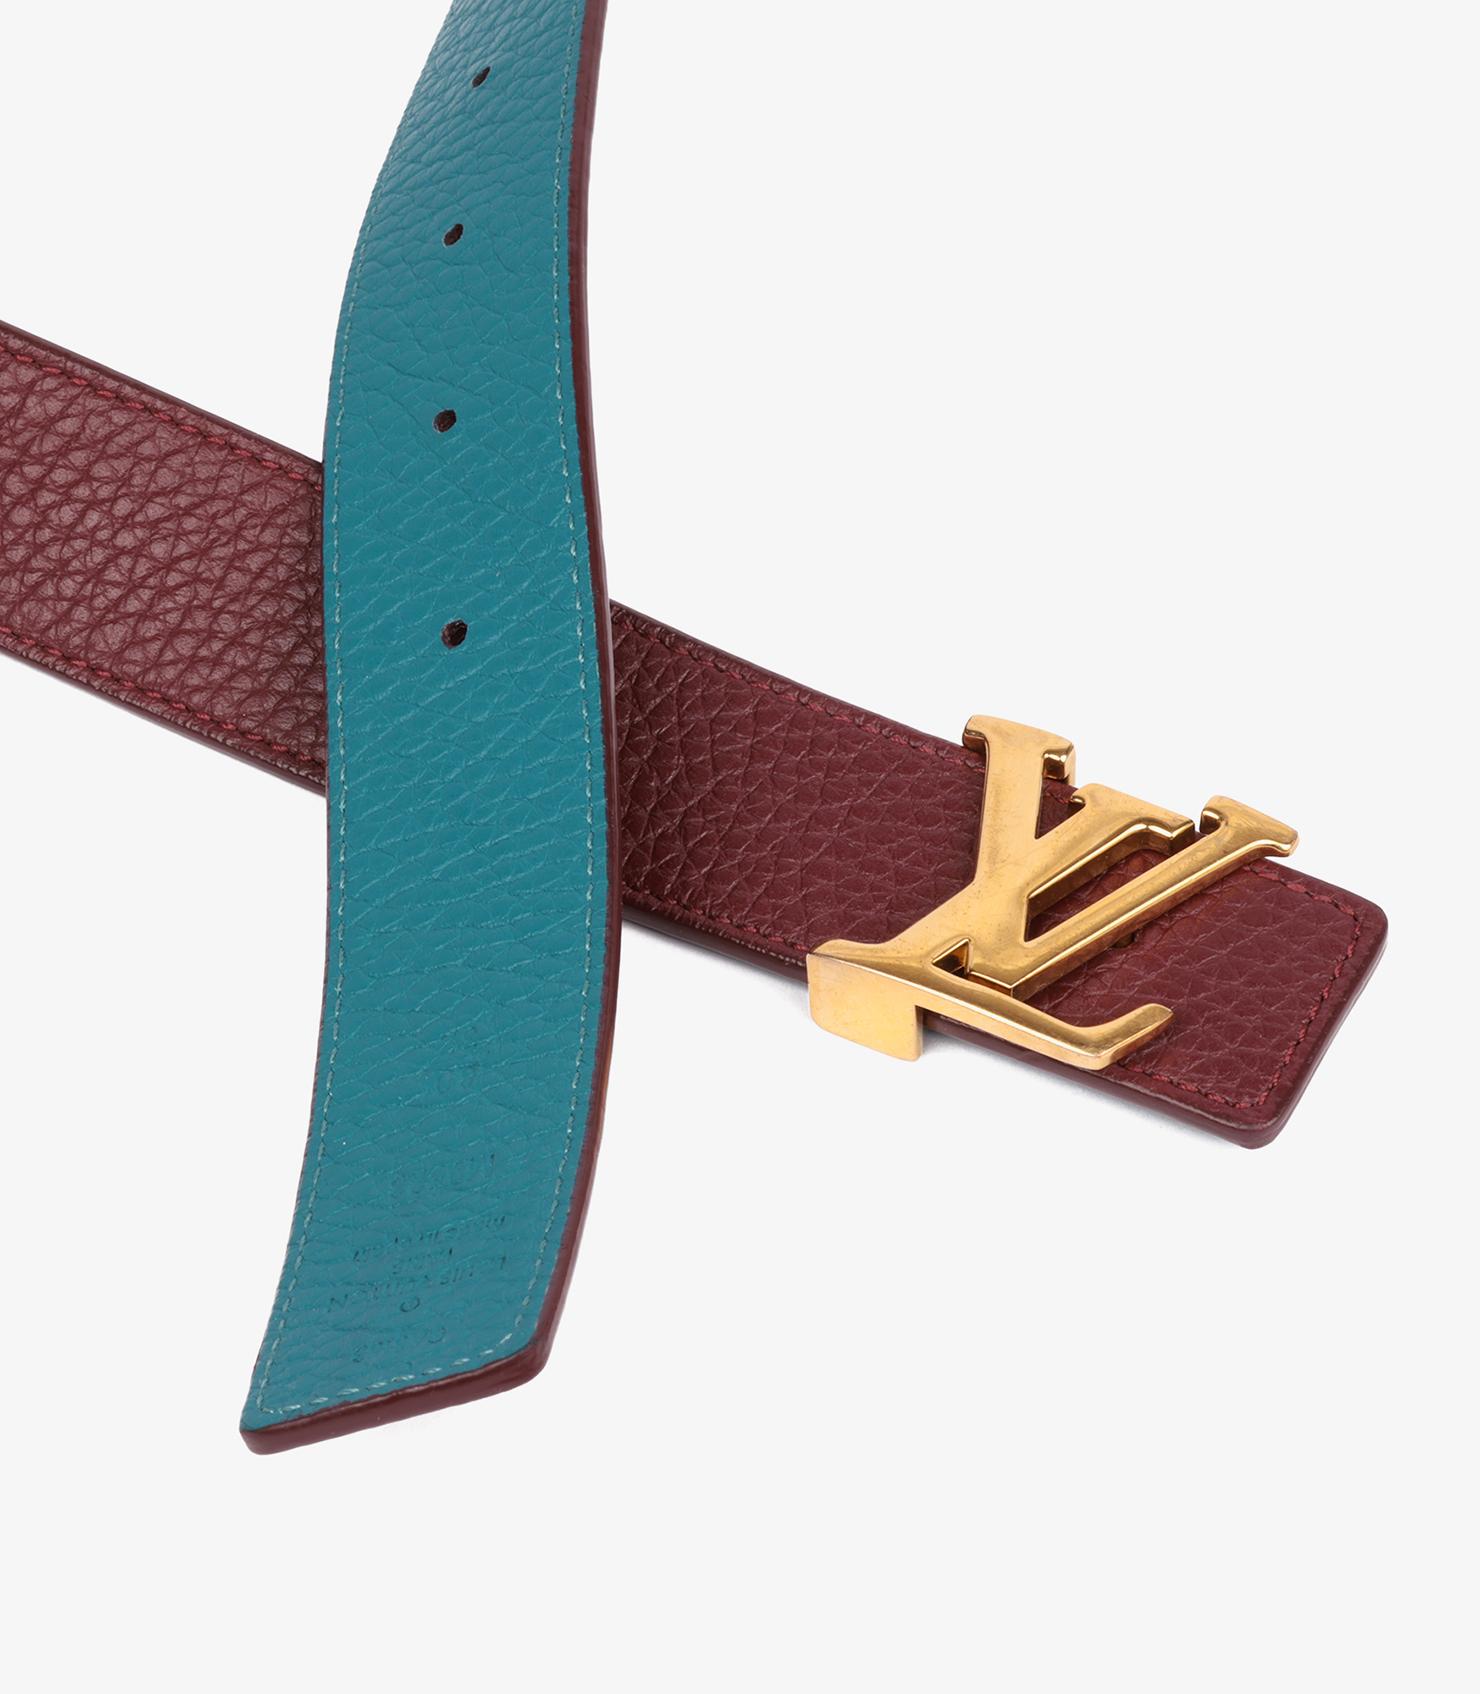 Louis Vuitton Teal & Burgundy Taurillon Calfskin Leather LV Initiales 30mm Reversible Belt

Brand- Louis Vuitton
Model- LV Initiales 30mm Reversible Belt
Product Type- Belt
Serial Number- CA3153
Age- Circa 2013
Accompanied By- Louis Vuitton Dust